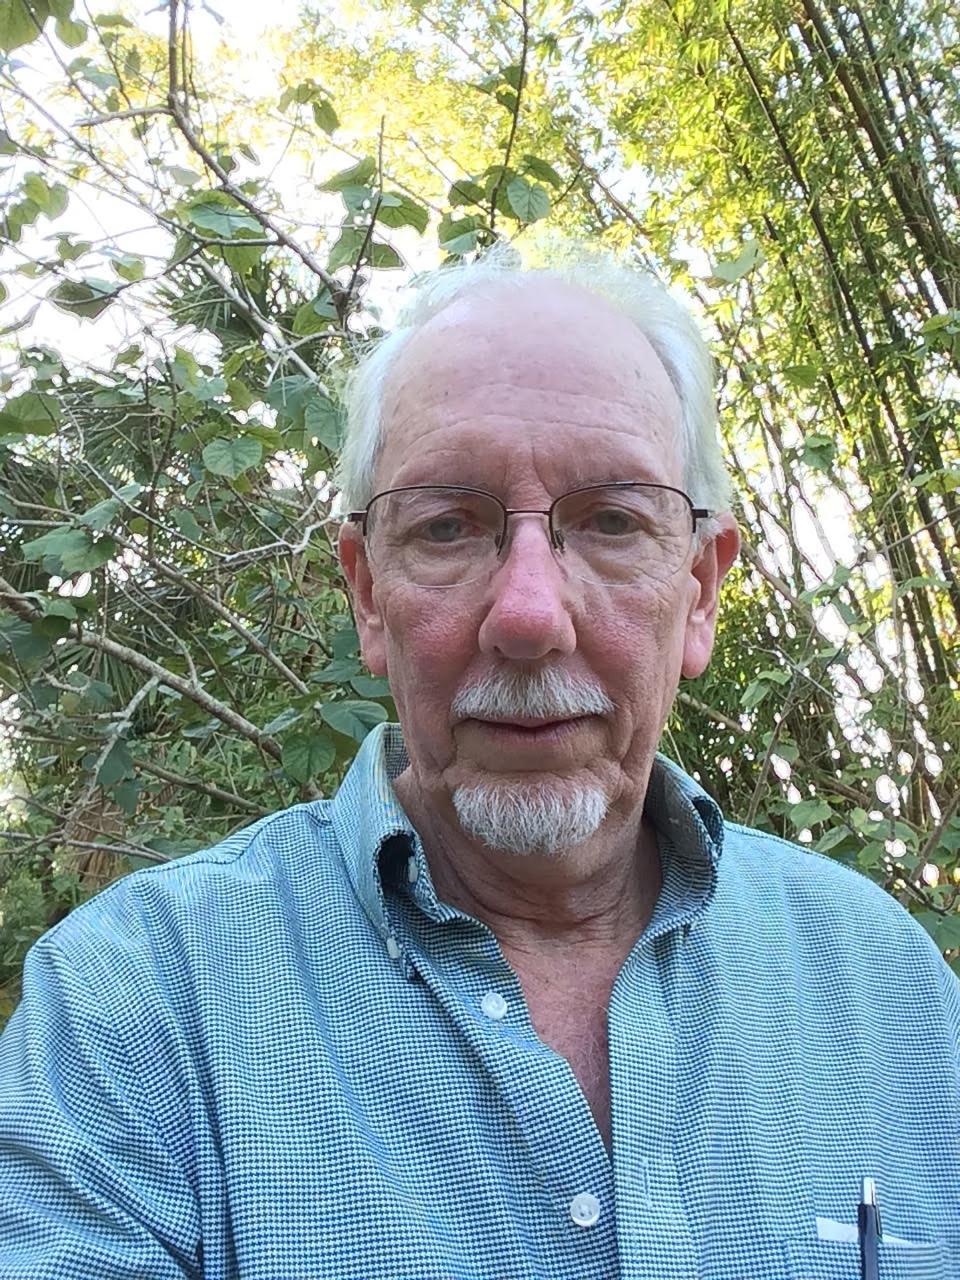 Avocational archaeologist and historian Charlie Strader.